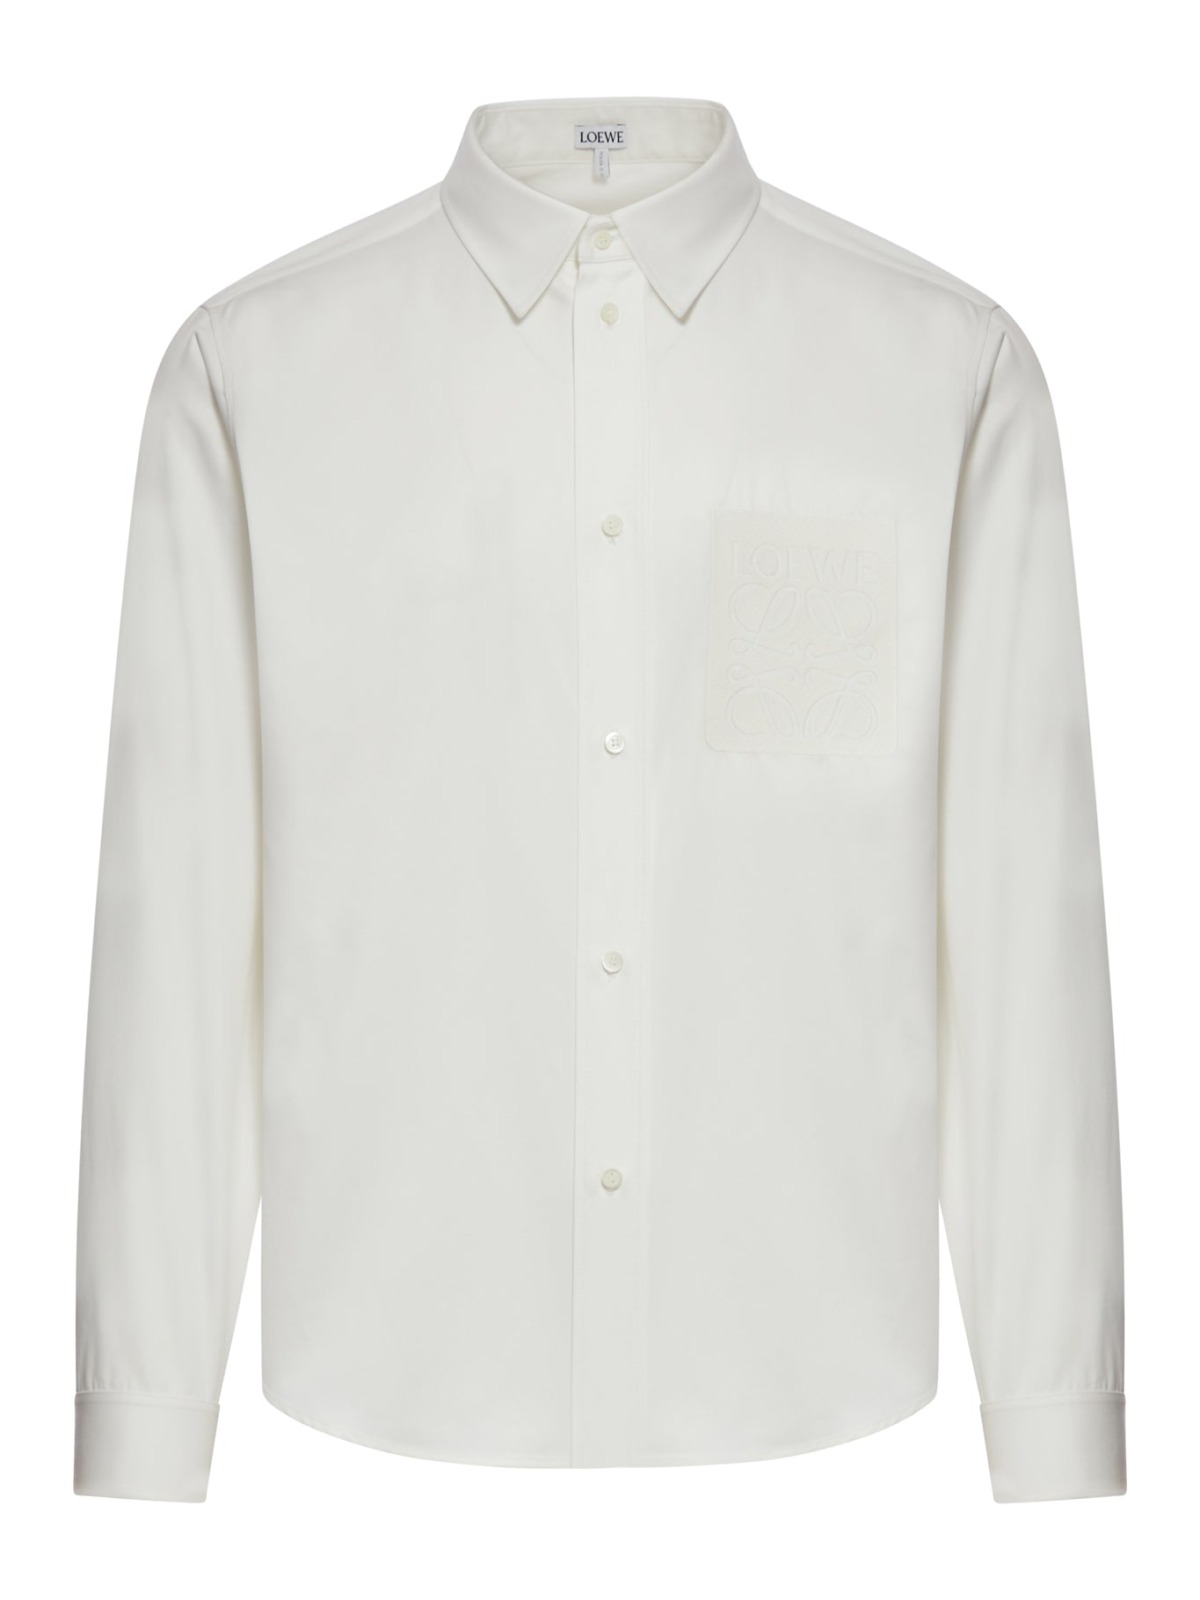 Man Shirt in White at Suitnegozi GOOFASH